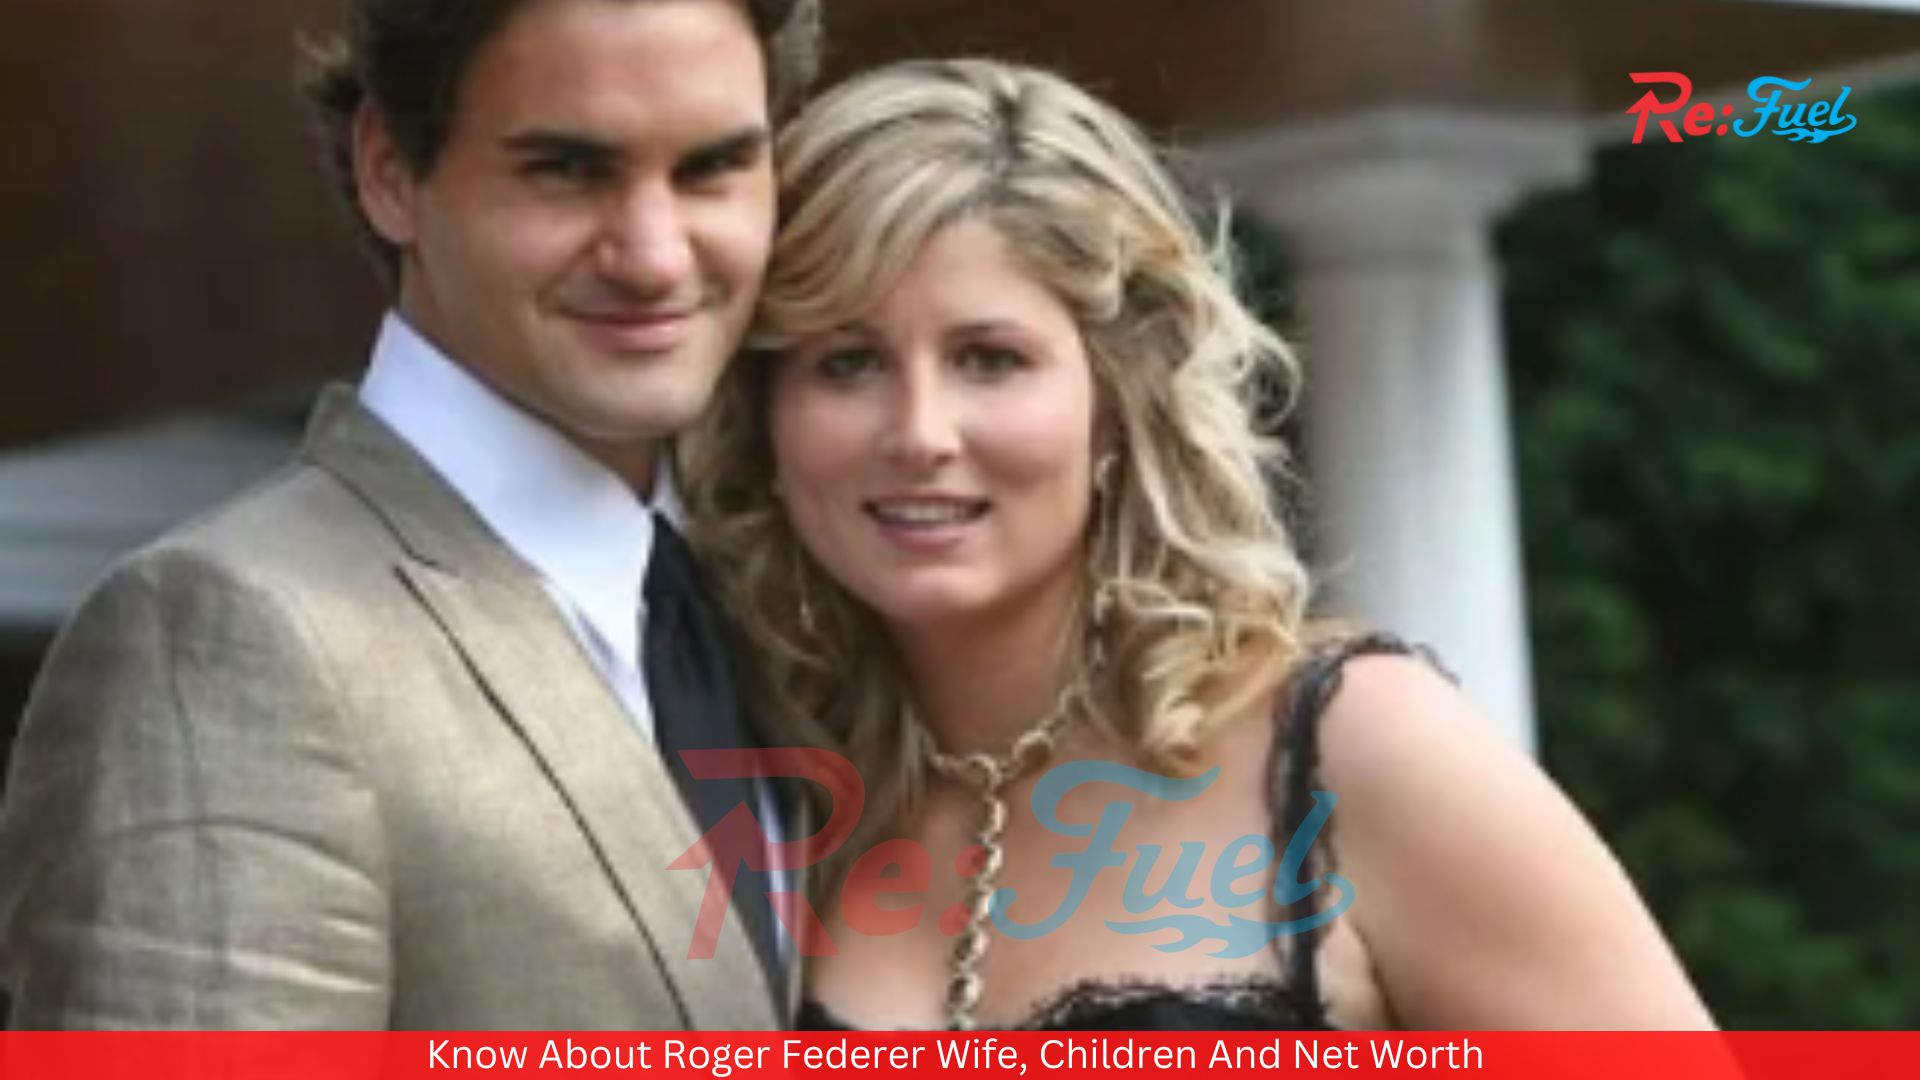 Know About Roger Federer Wife, Children And Net Worth